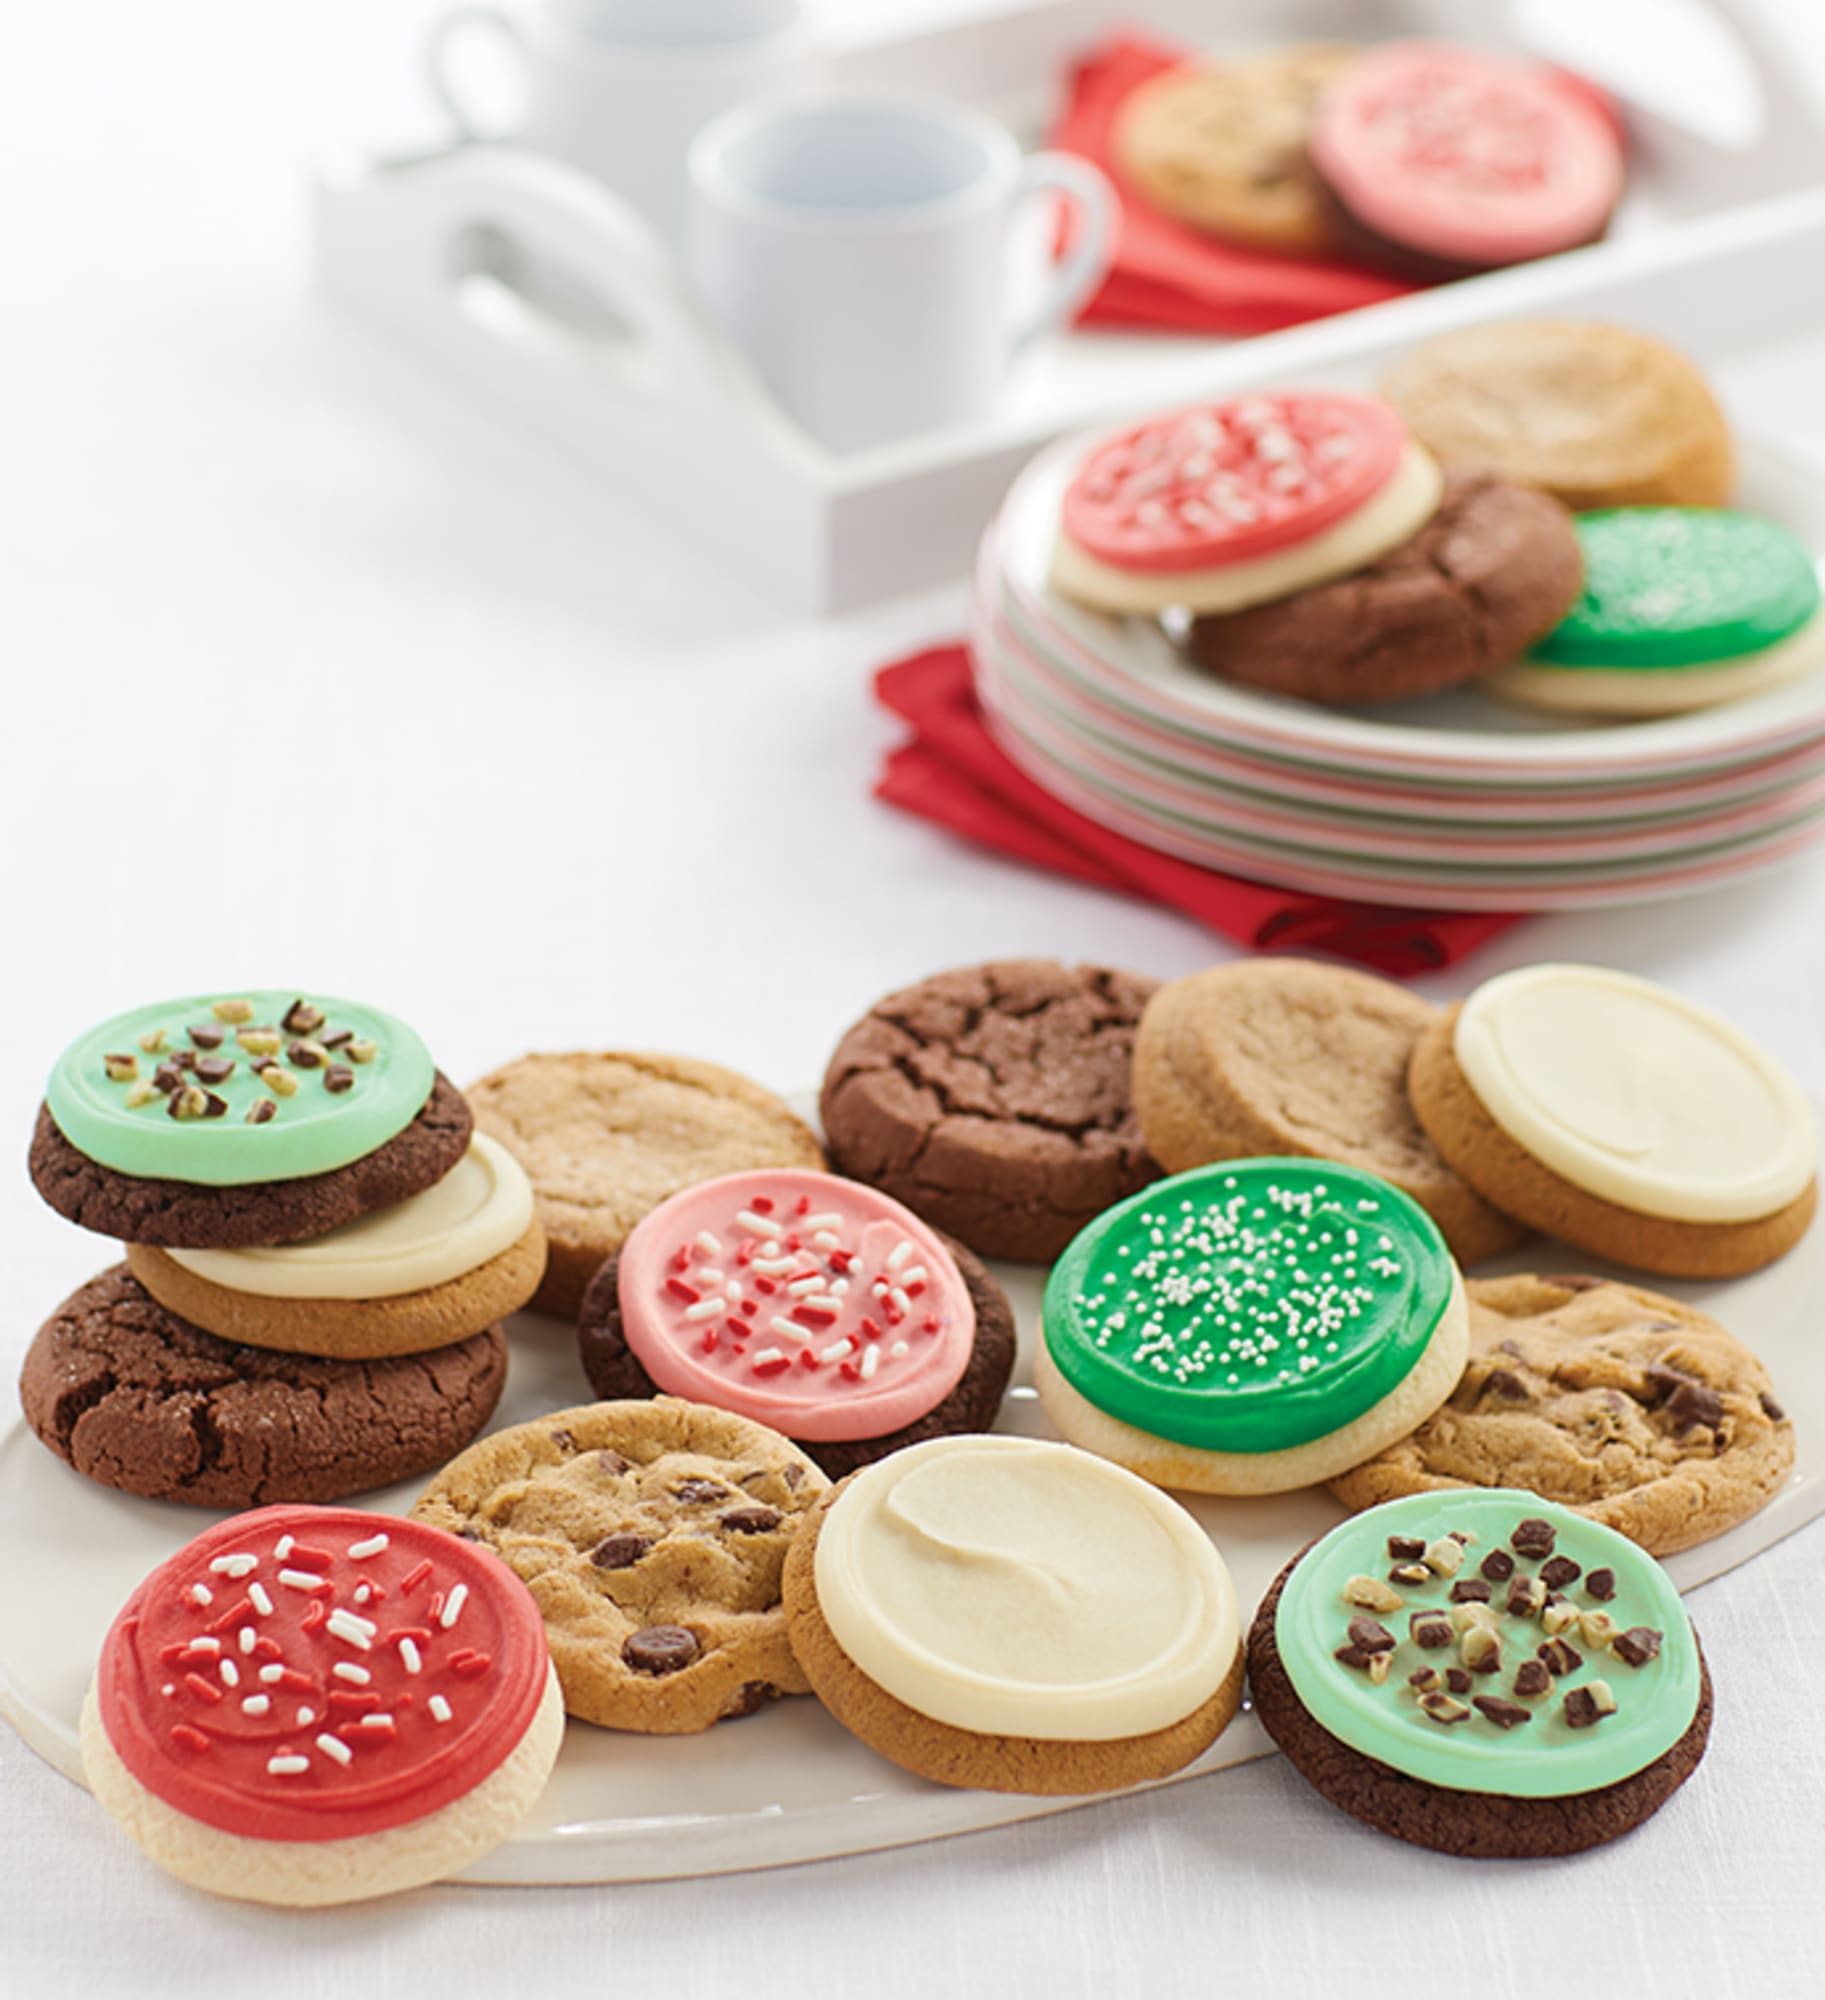 Costco S 70 Count Christmas Cookie Tray Is Stealing The Show